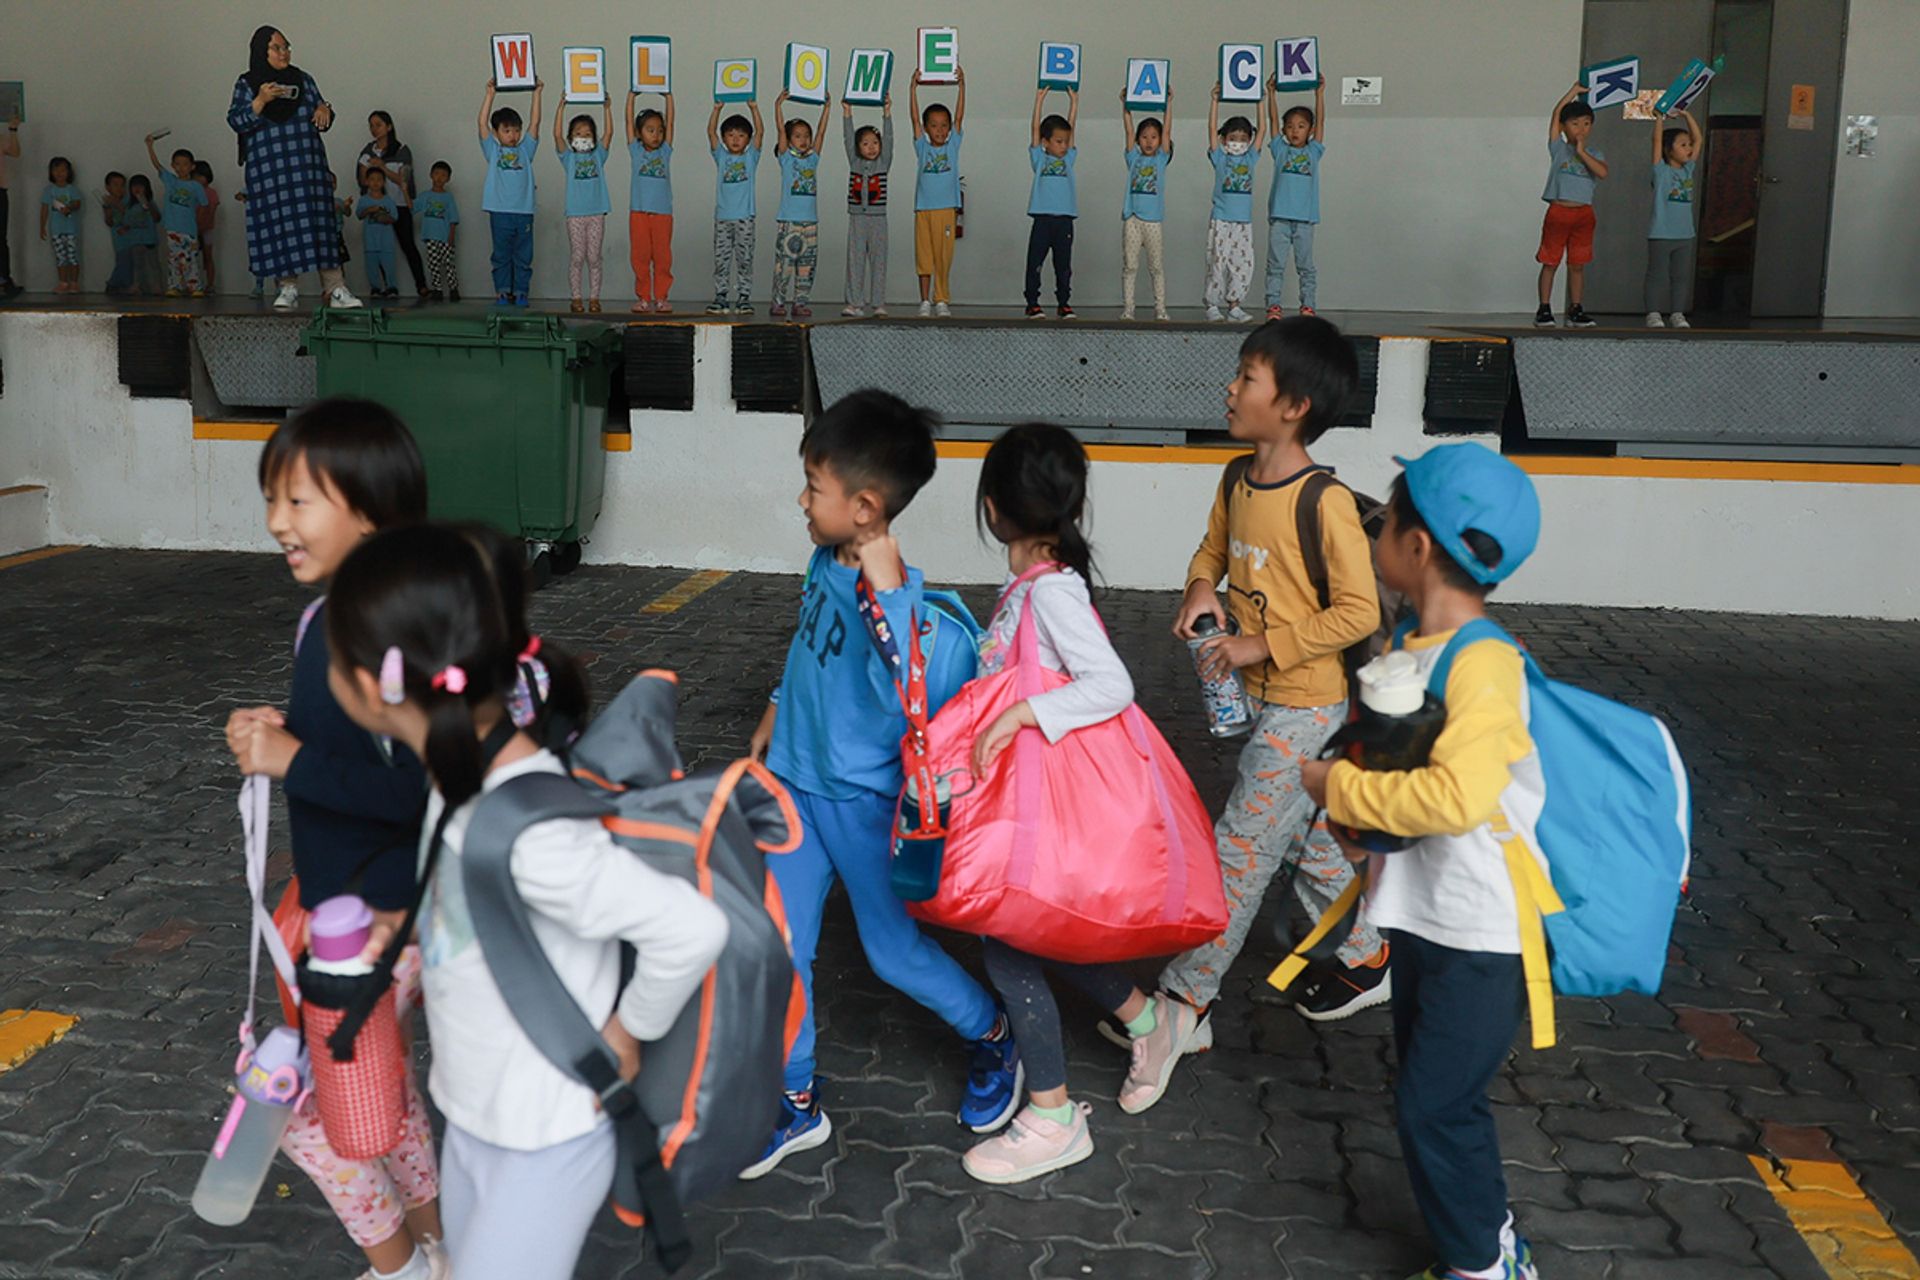 Children and staff of Creative O Preschoolers’ Bay cheer the K2 seniors and welcome them back after the camp. This makes the younger children curious about the camp and look forward to their own camp experience.